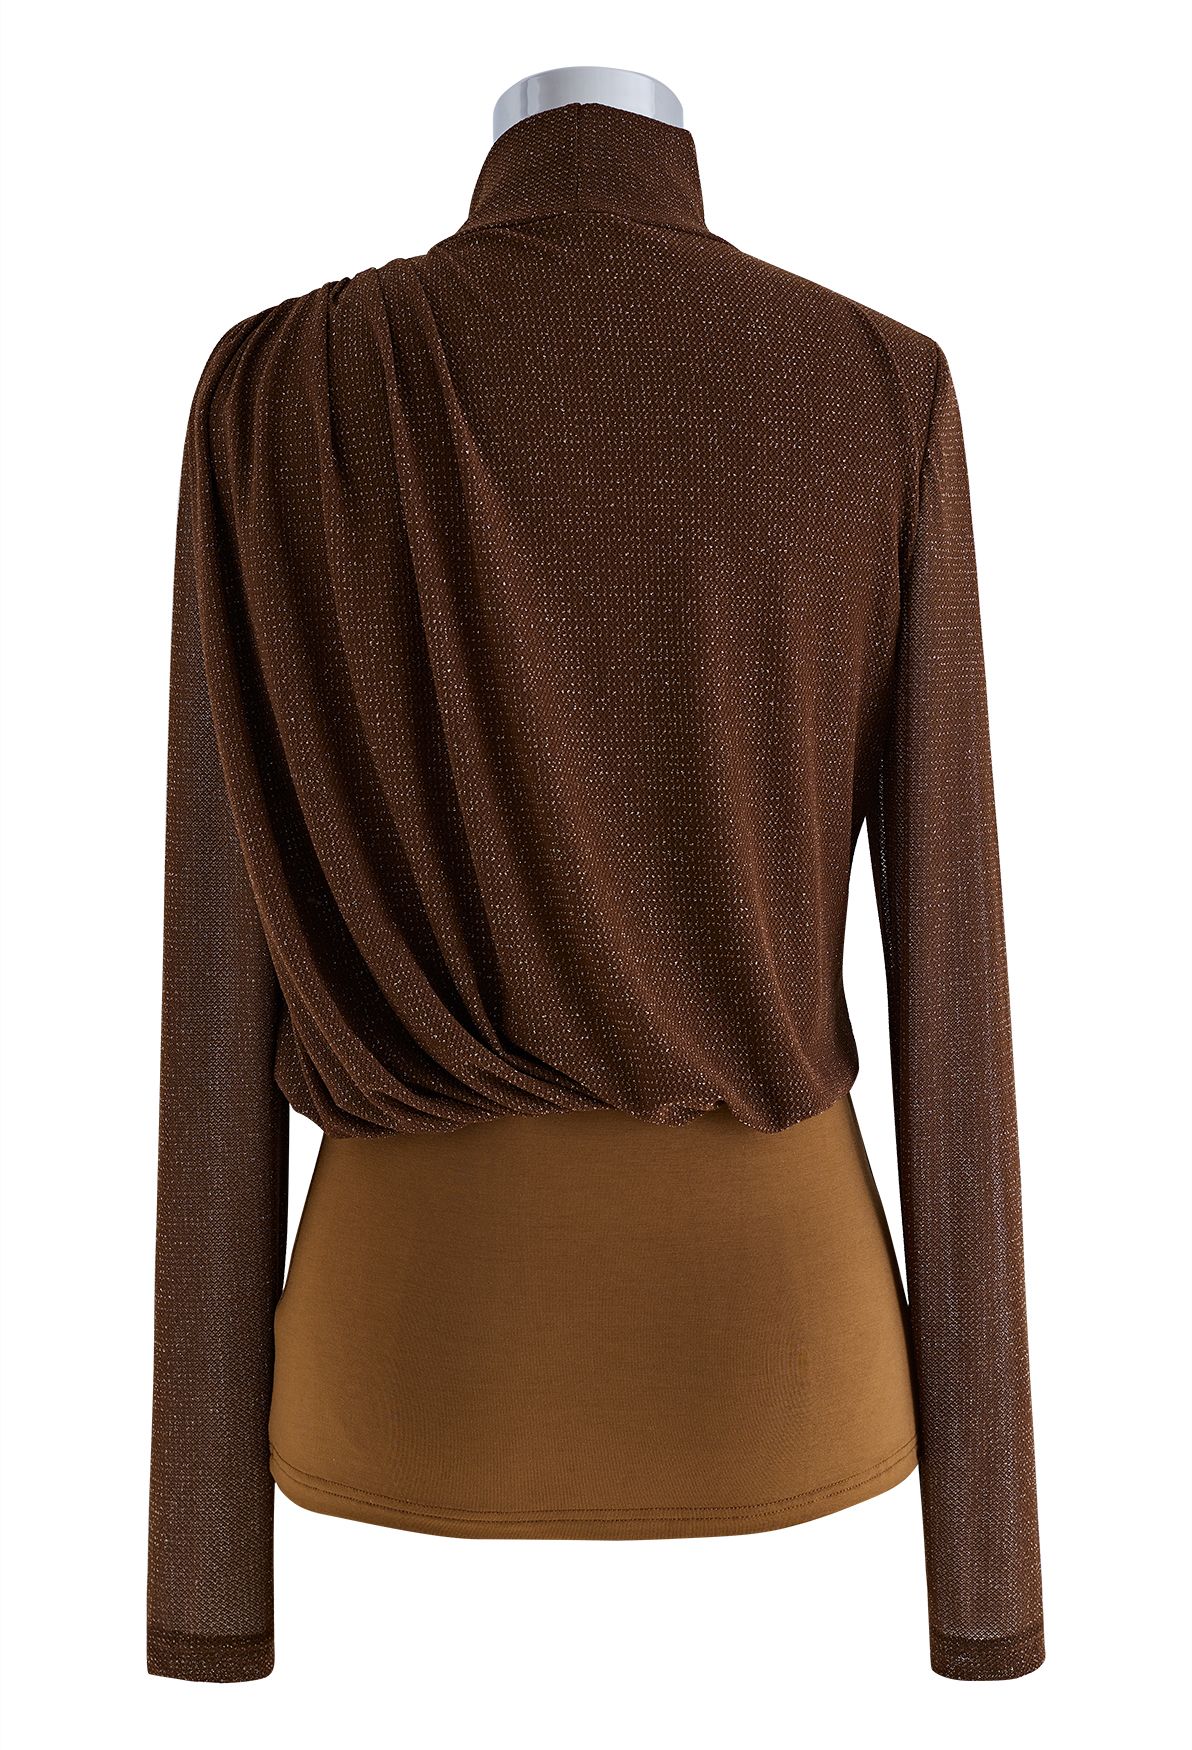 Gleam High Neck Spliced Ruched Top in Brown